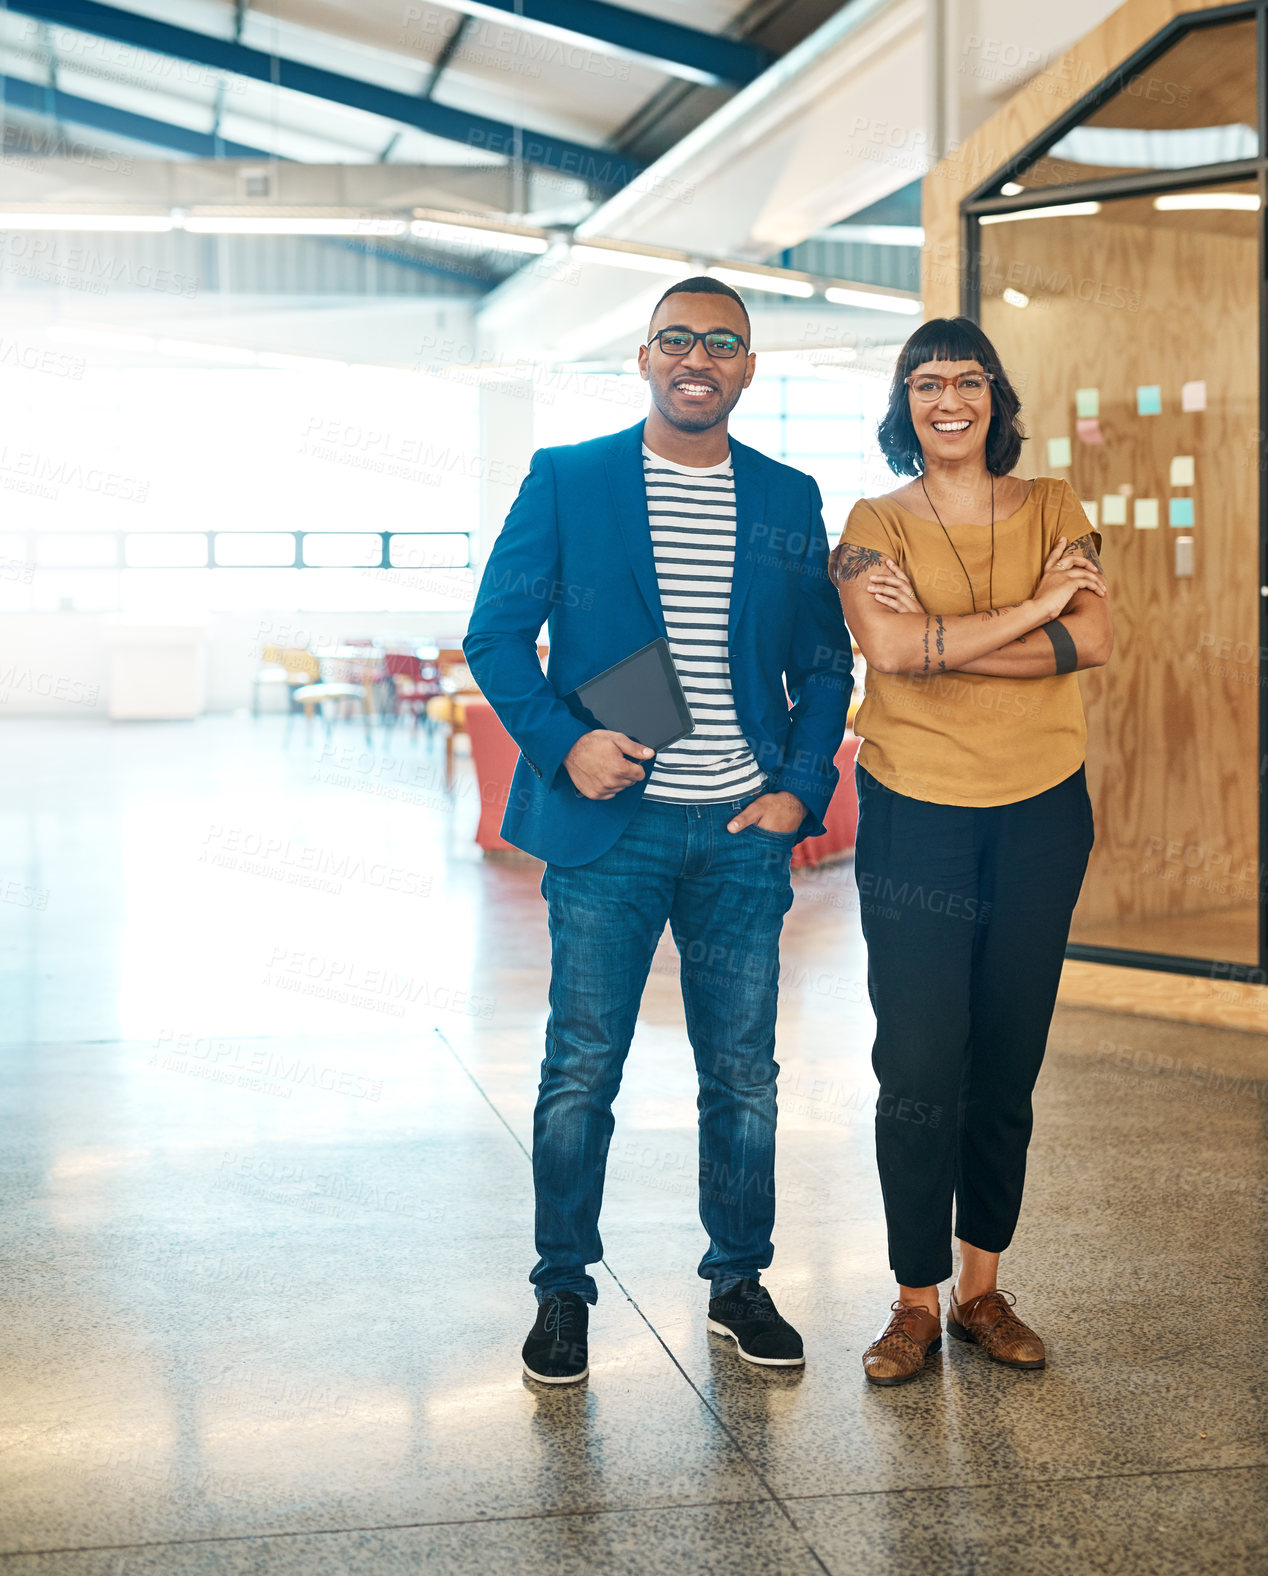 Buy stock photo Portrait of two young designers standing together in an office